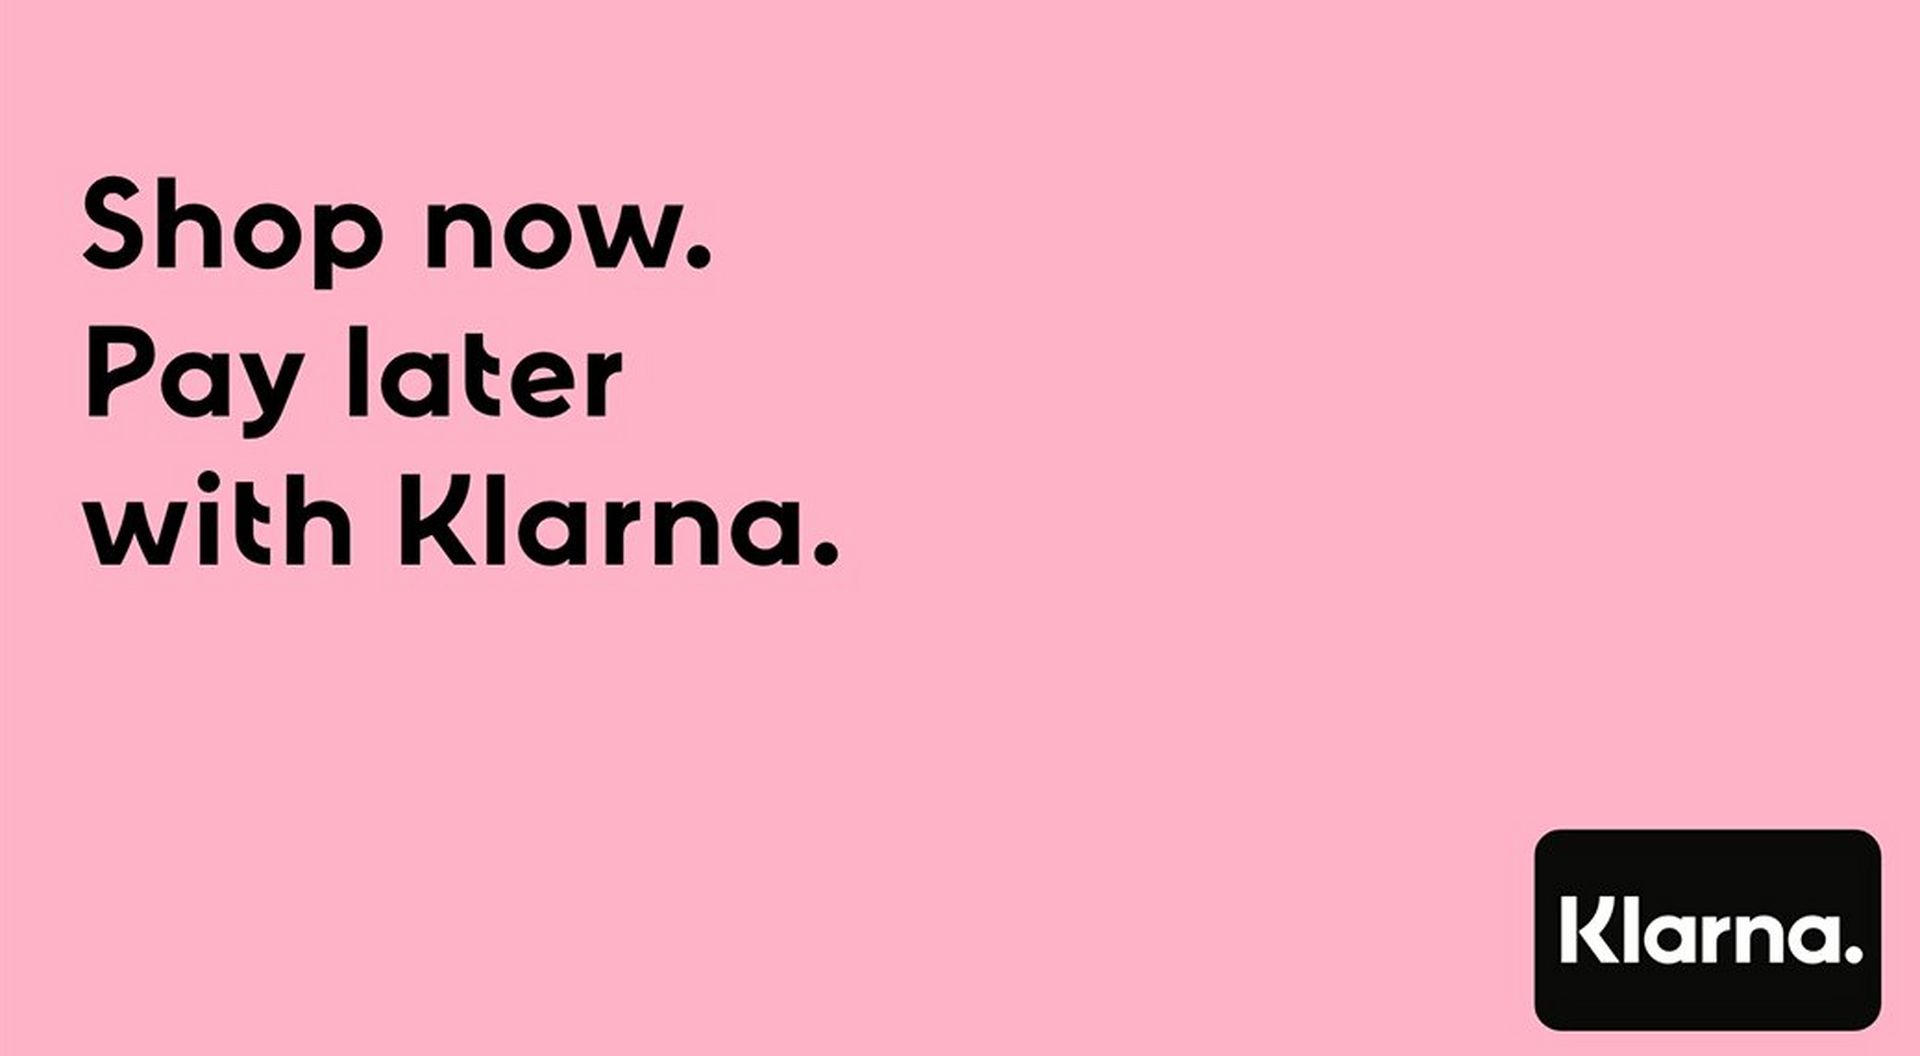 Klarna - Payment Plans That Work For You